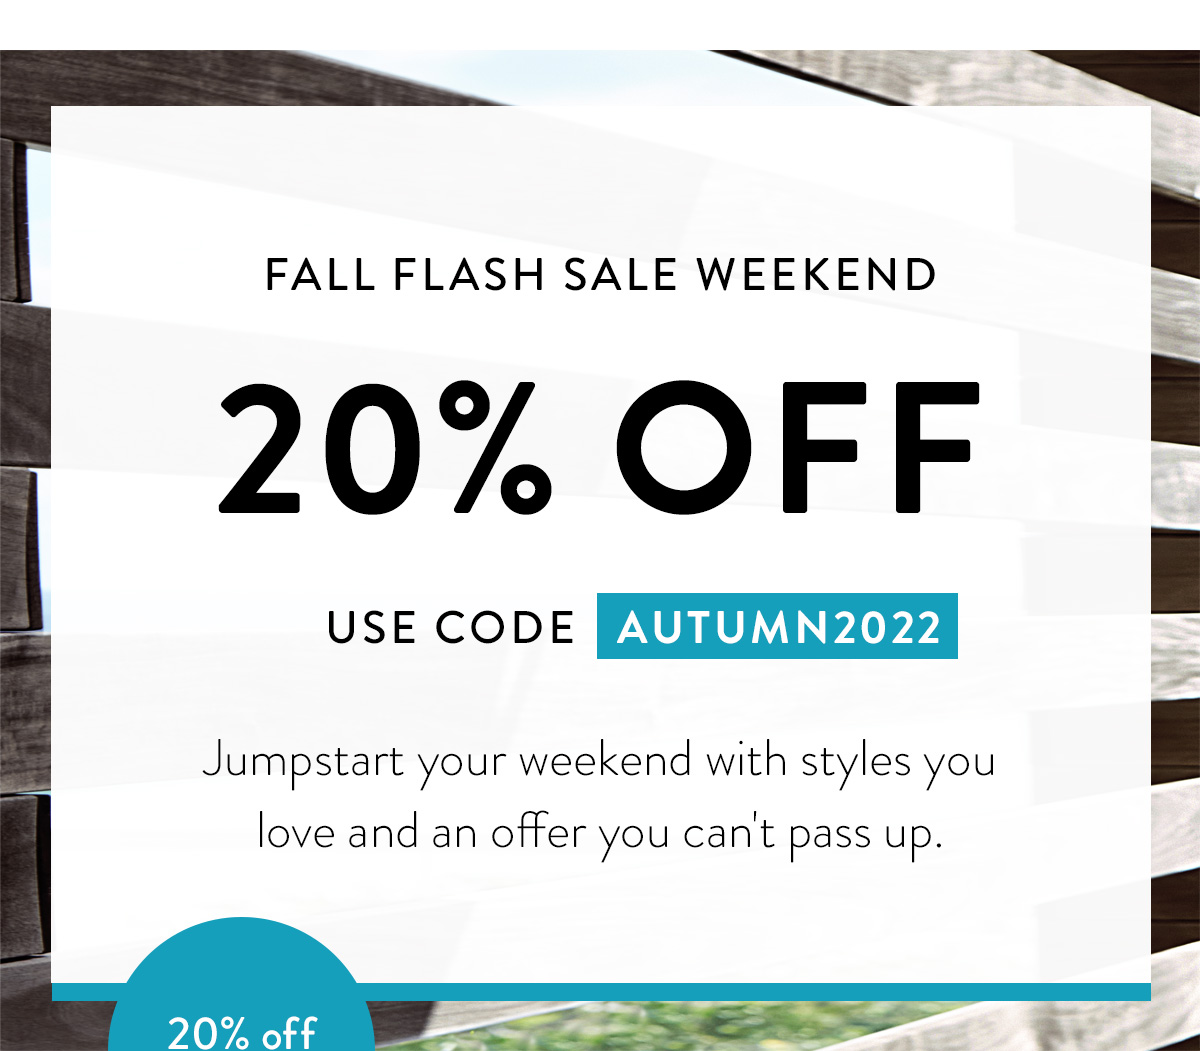 FALL FLASH SALE WEEKEND / 20% OFF / USE CODE AUTUMN2022 / Jumpstart your weekend with styles you love and an offer you can't pass up